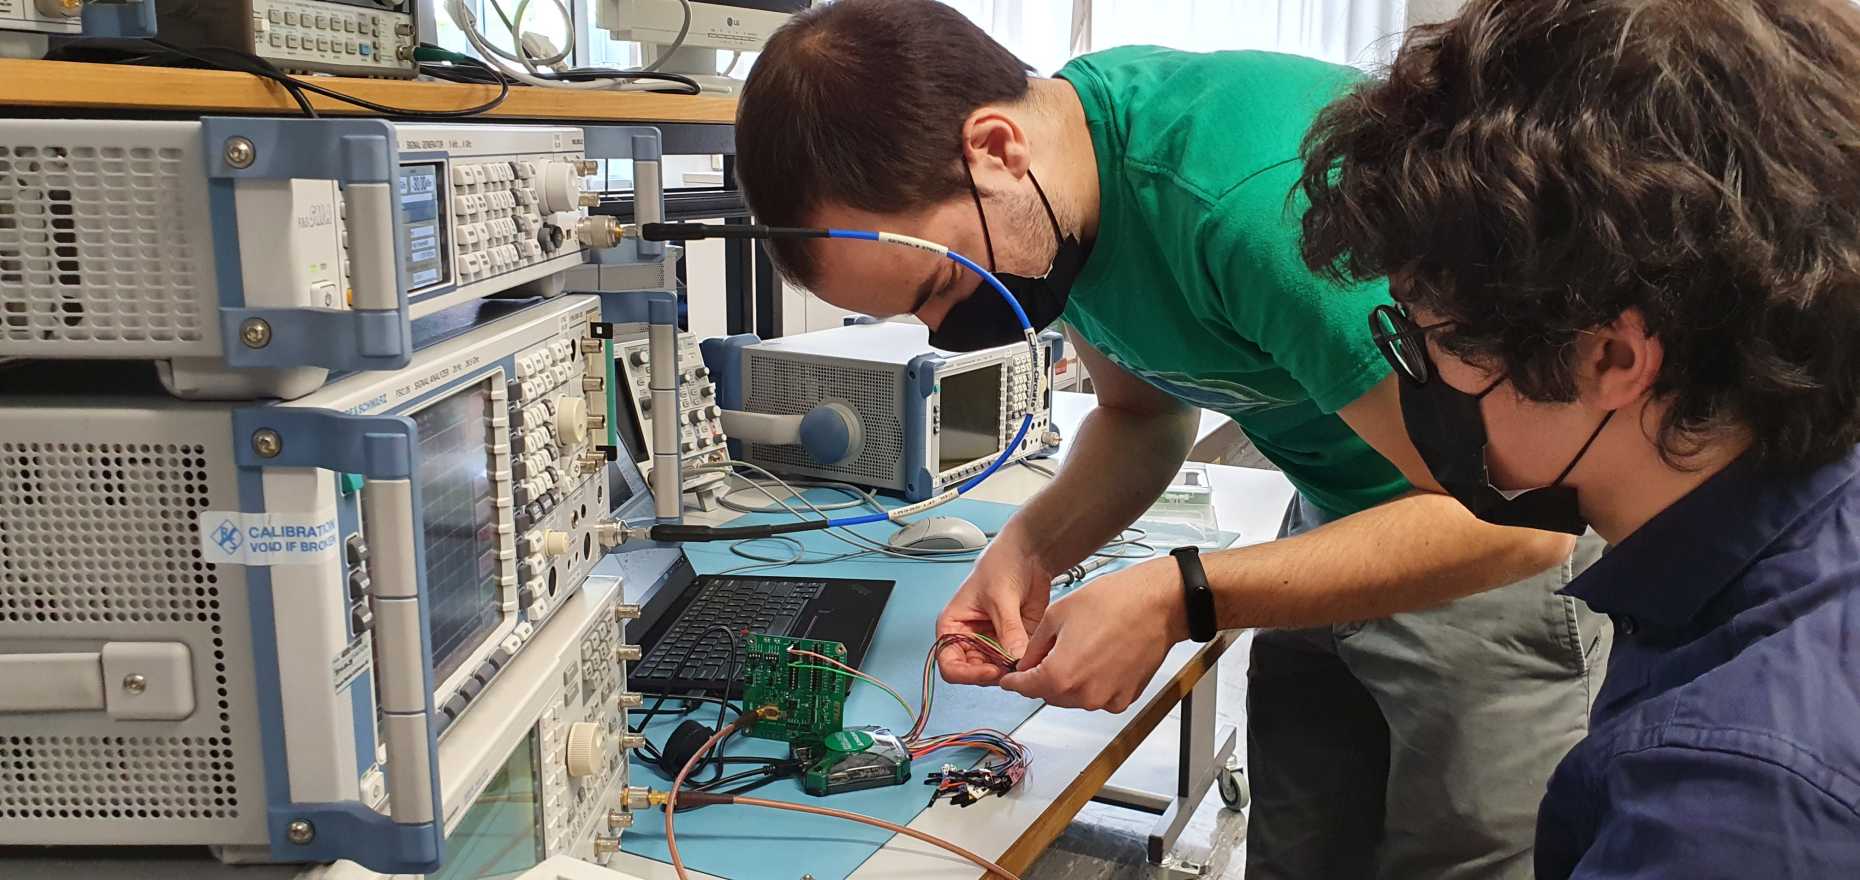 Center for Project Based Learning (D-ITET): Enea Masina and Federico Villani are building the wake-up receiver as an integrated circuit. (photo: Philipp Mayer)